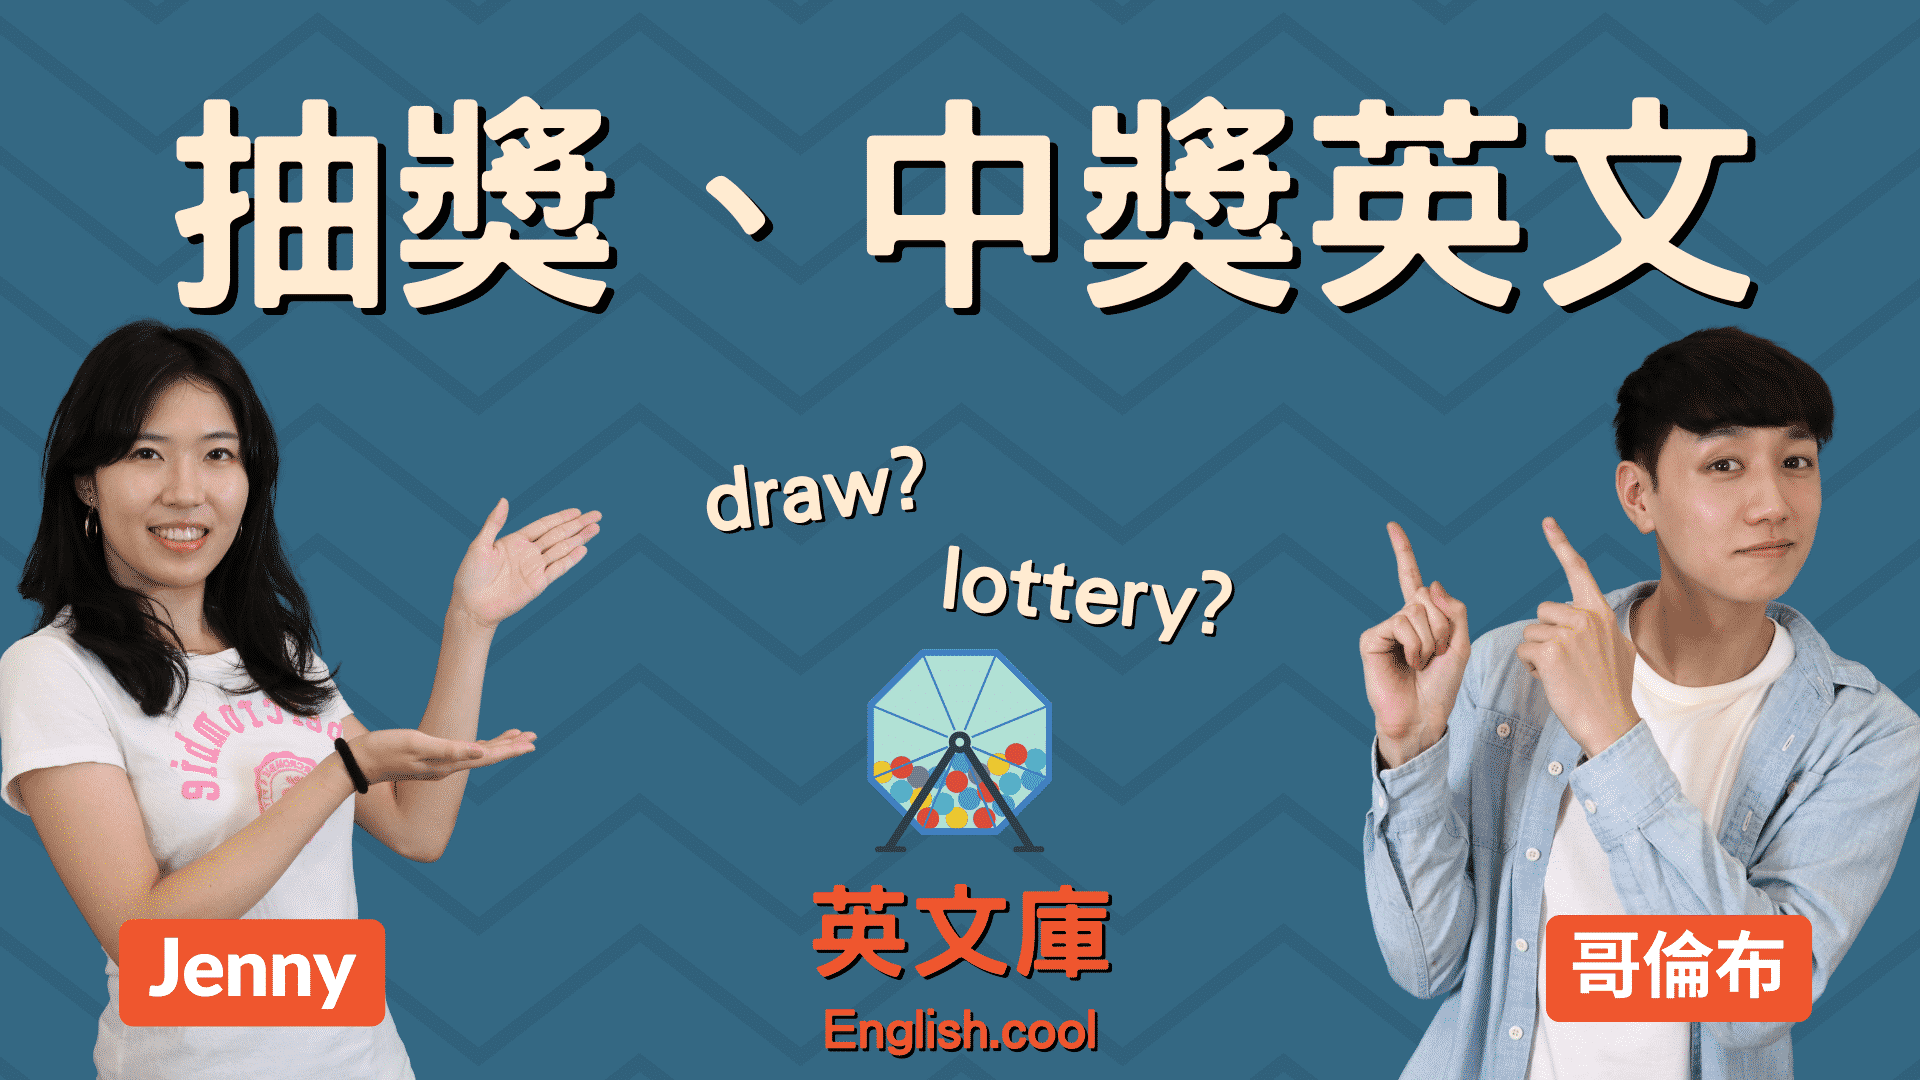 You are currently viewing 「抽獎」英文是 Draw 還是 Lottery?